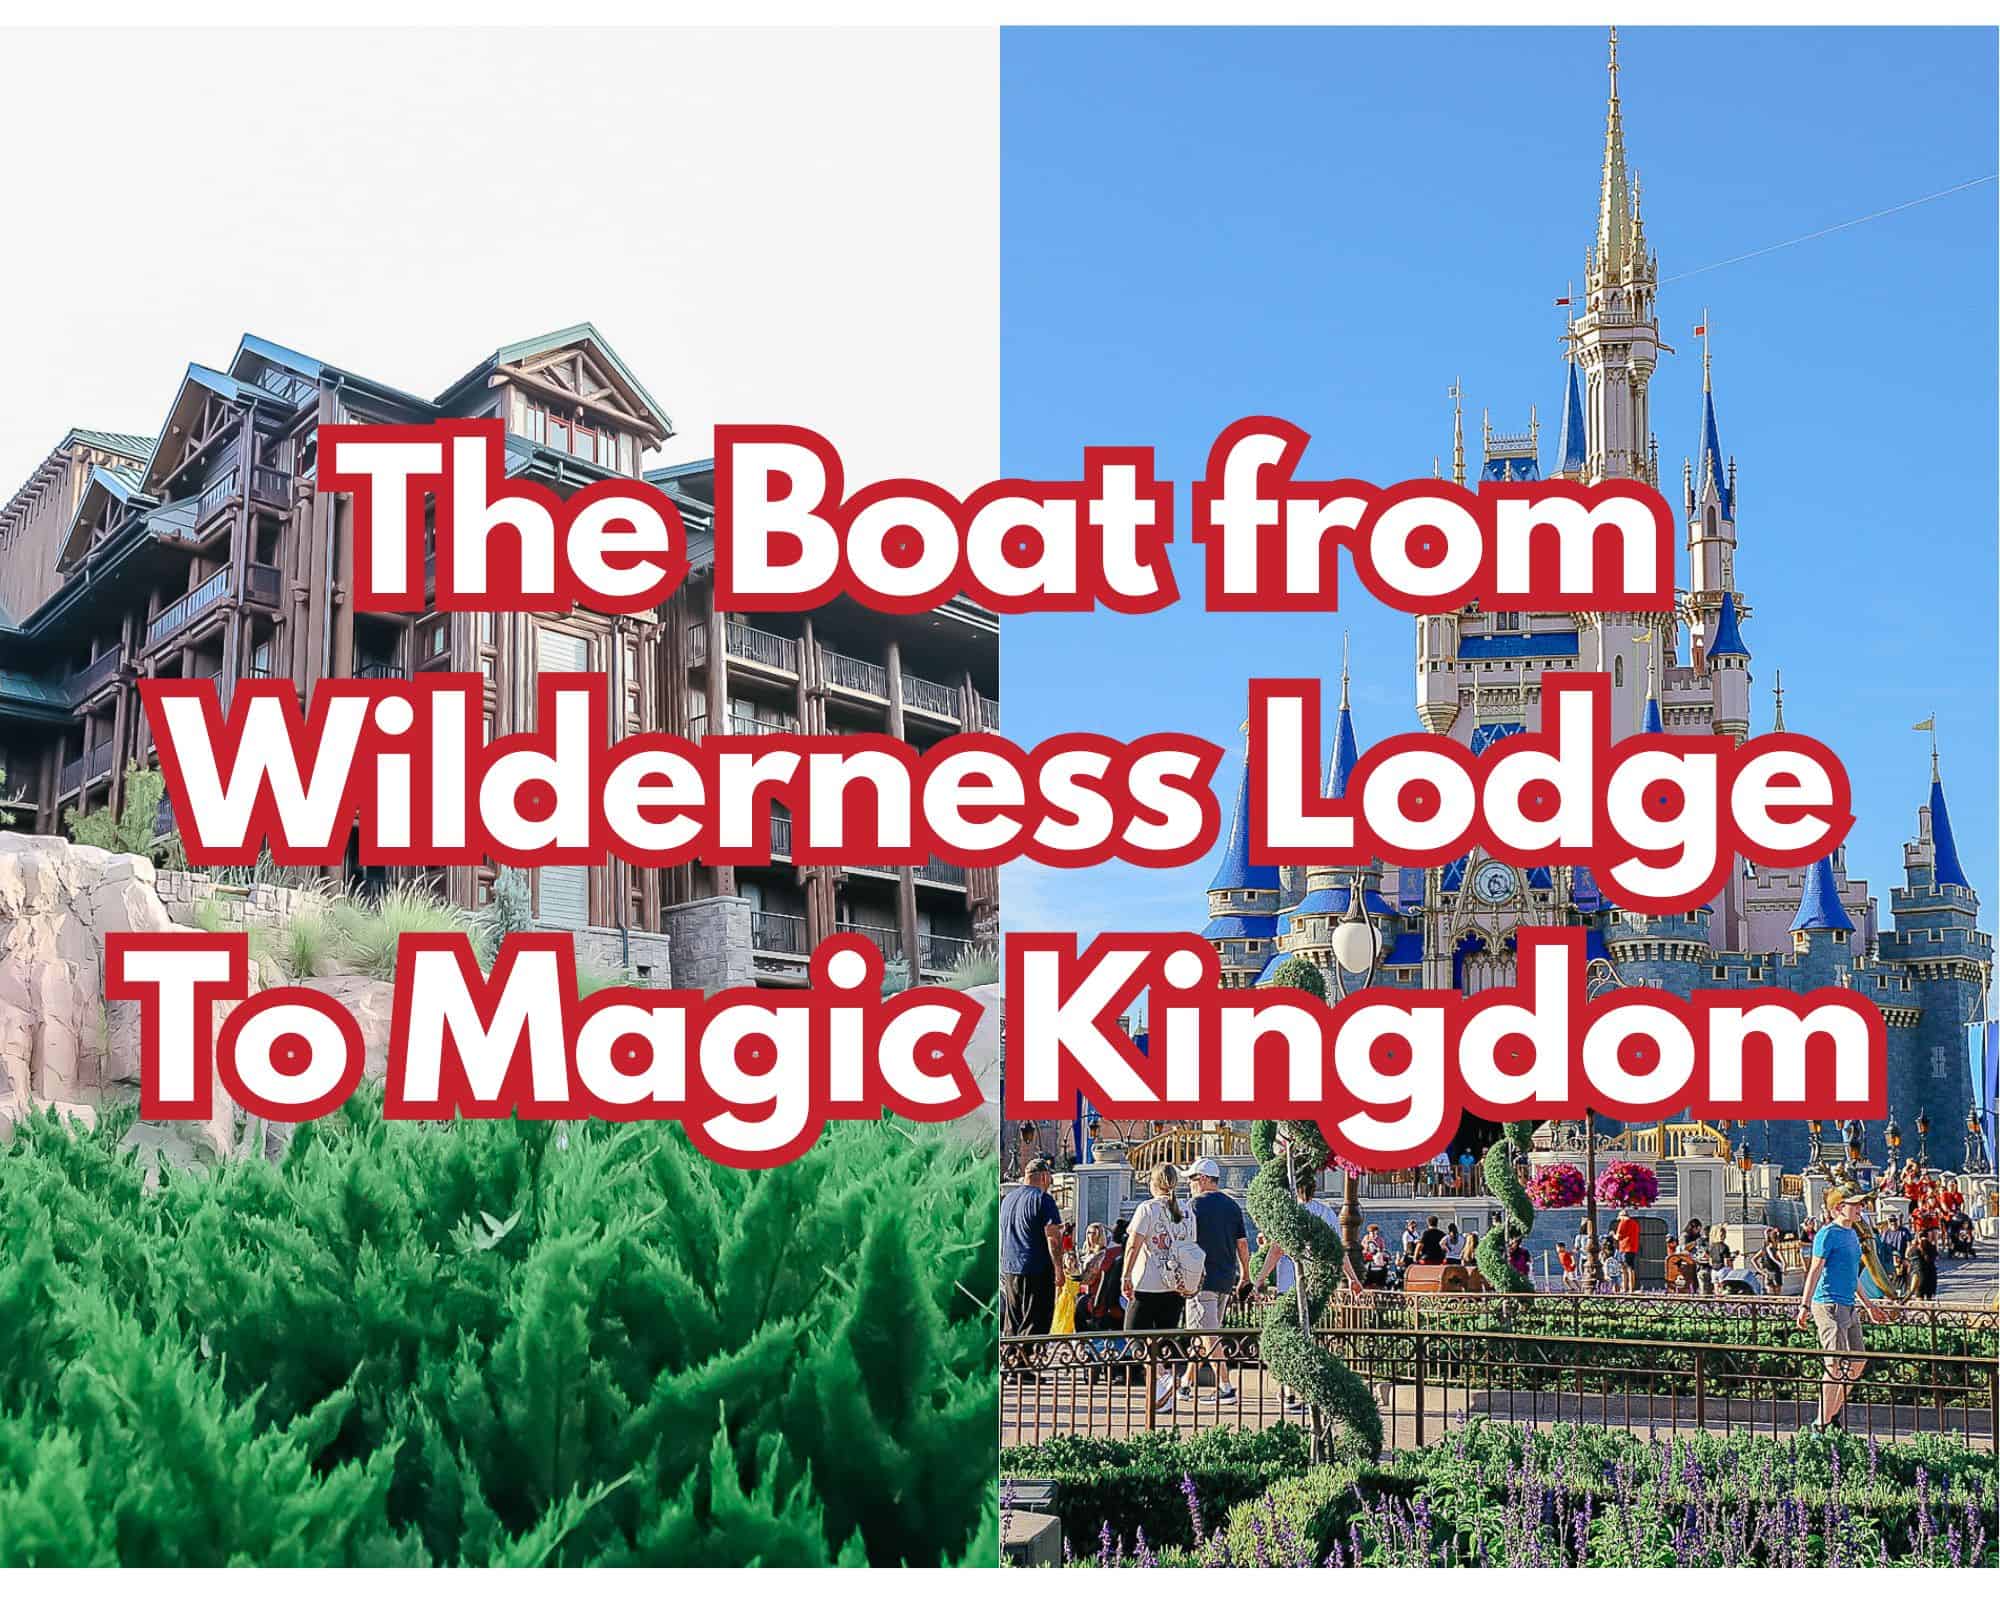 Taking the Boat Between Wilderness Lodge and Magic Kingdom (Photos)